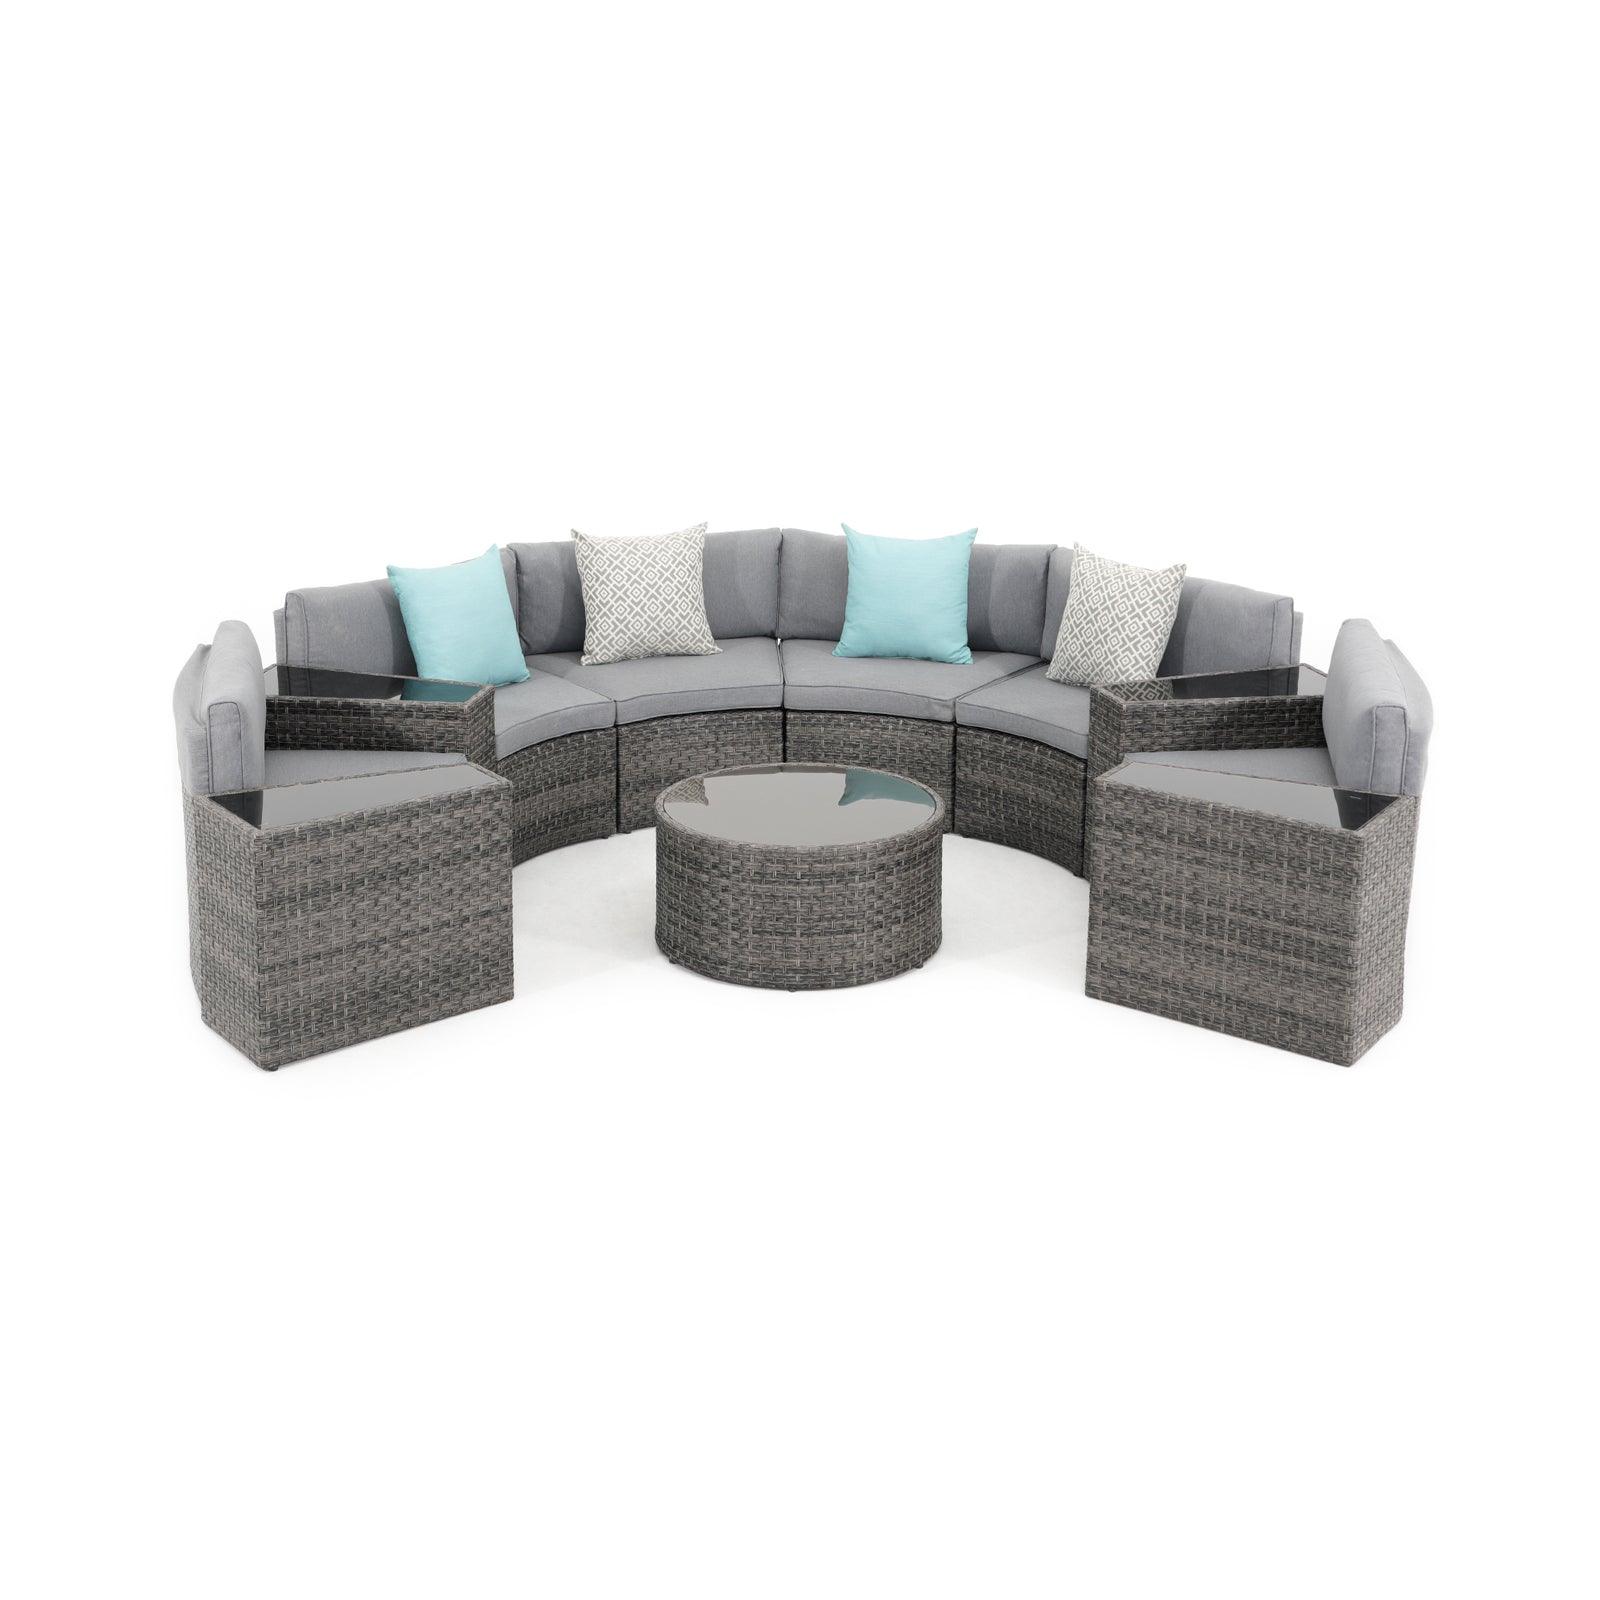 Boboli Modern Wicker Outdoor Furniture, 11-piece Grey Wicker Curved Sectional Set with grey cushions, 1 Round Glass Table, 4 side tables, 6 sectional sofas, front- Jardina Furniture #color_Grey #piece_9-pc.